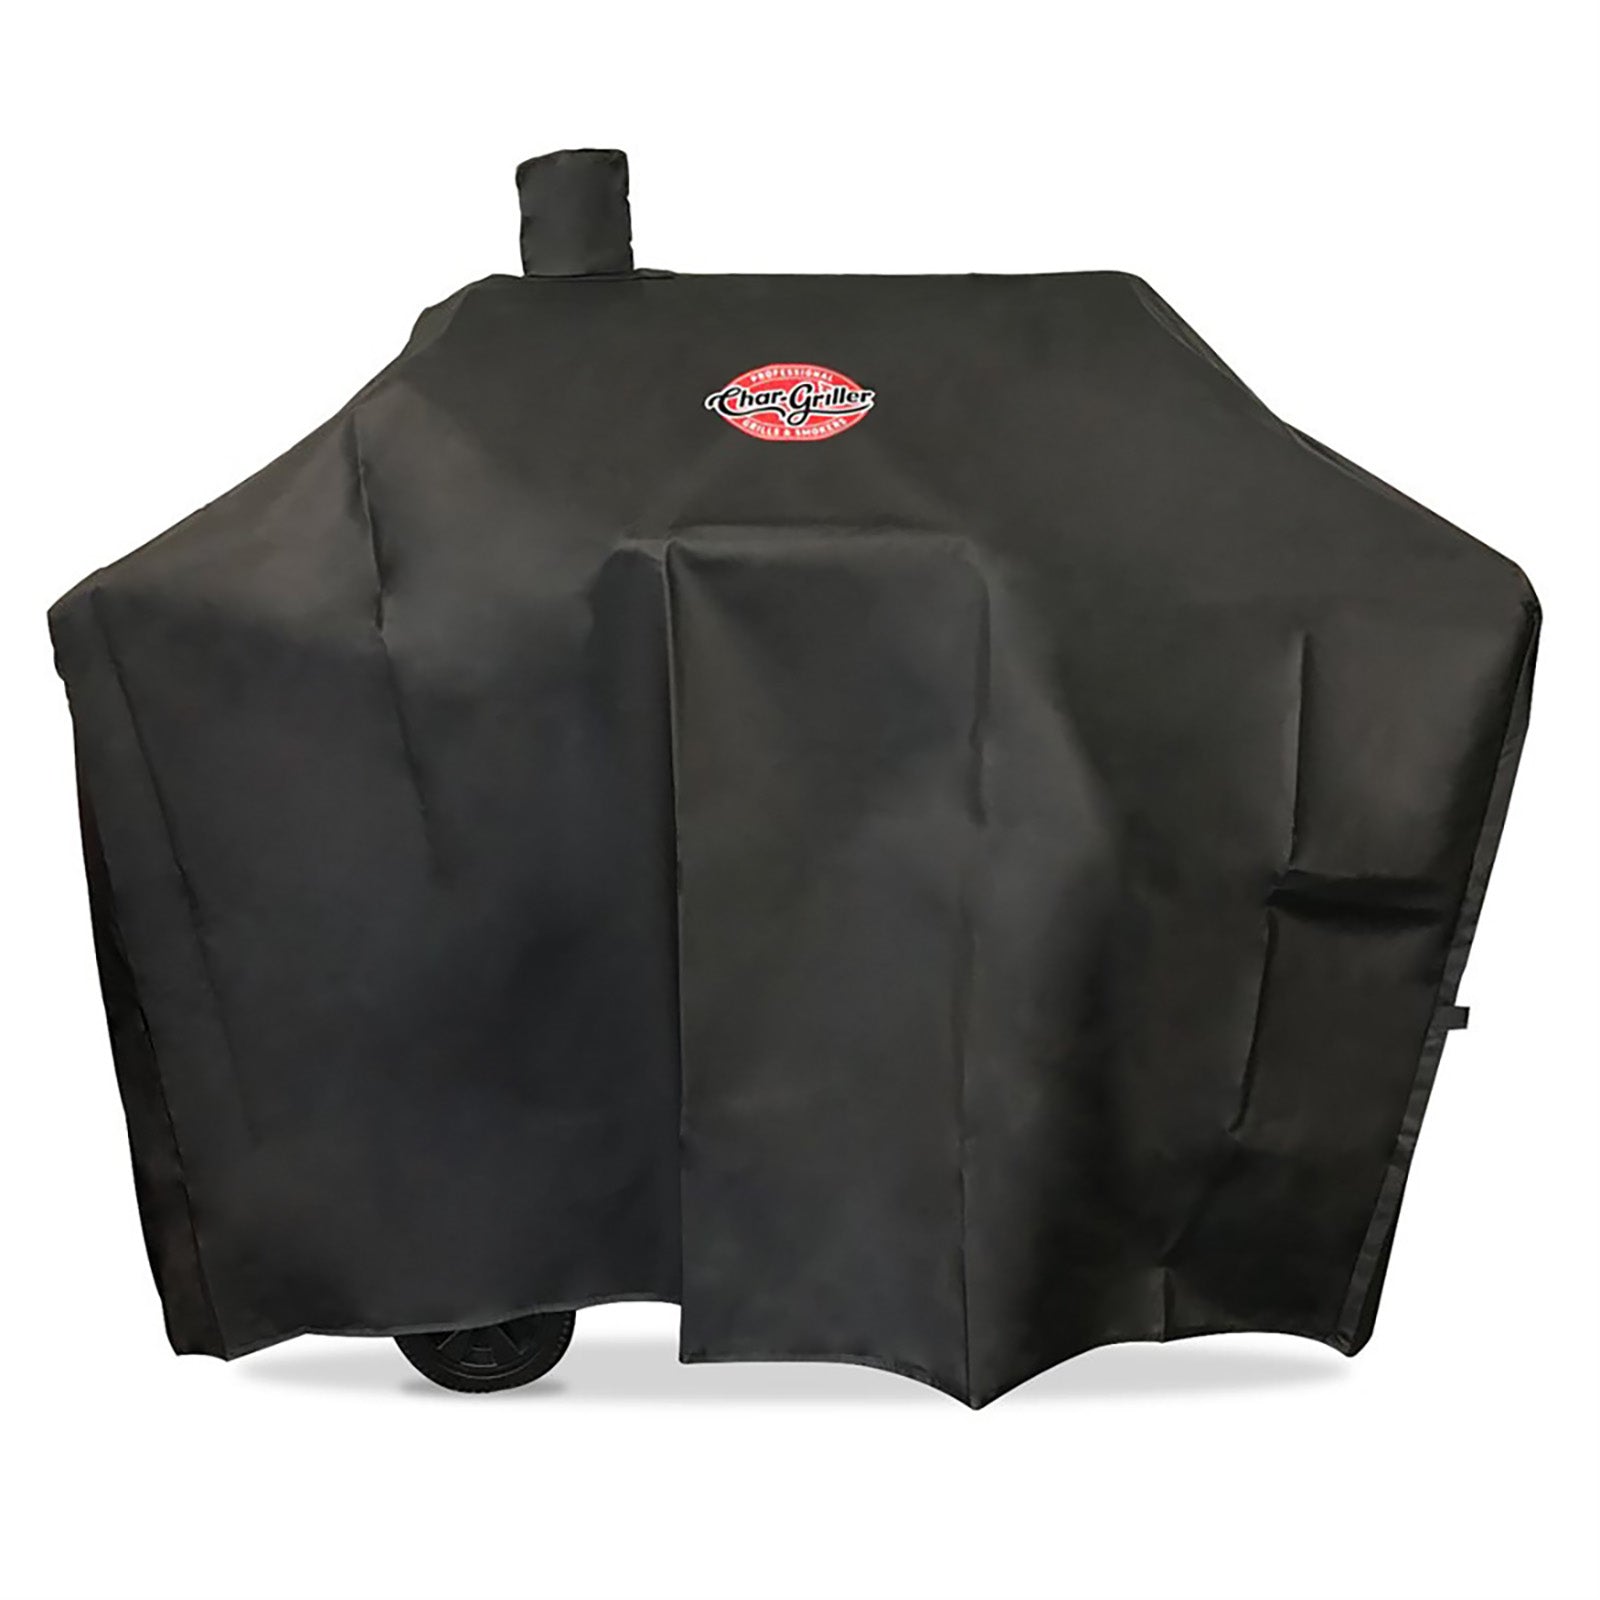 Legacy Charcoal Grill Cover